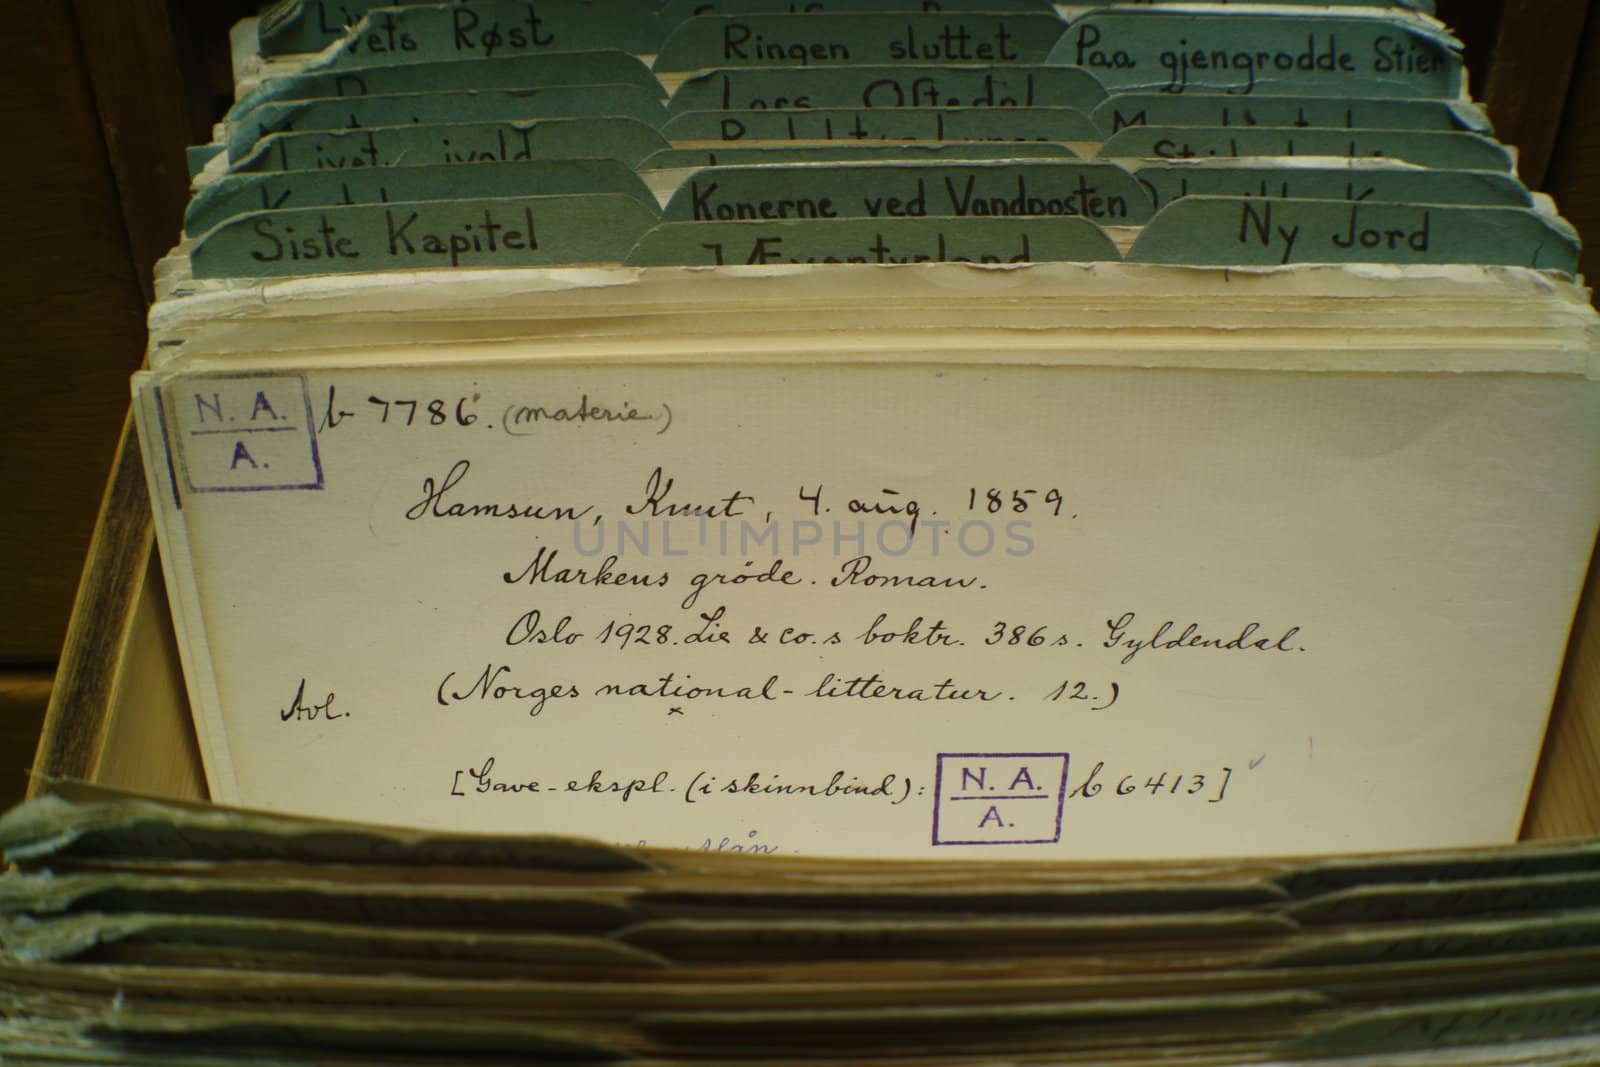 The catalogue card for Knut Hamsuns "Markens grøde" (Growth of the soil)